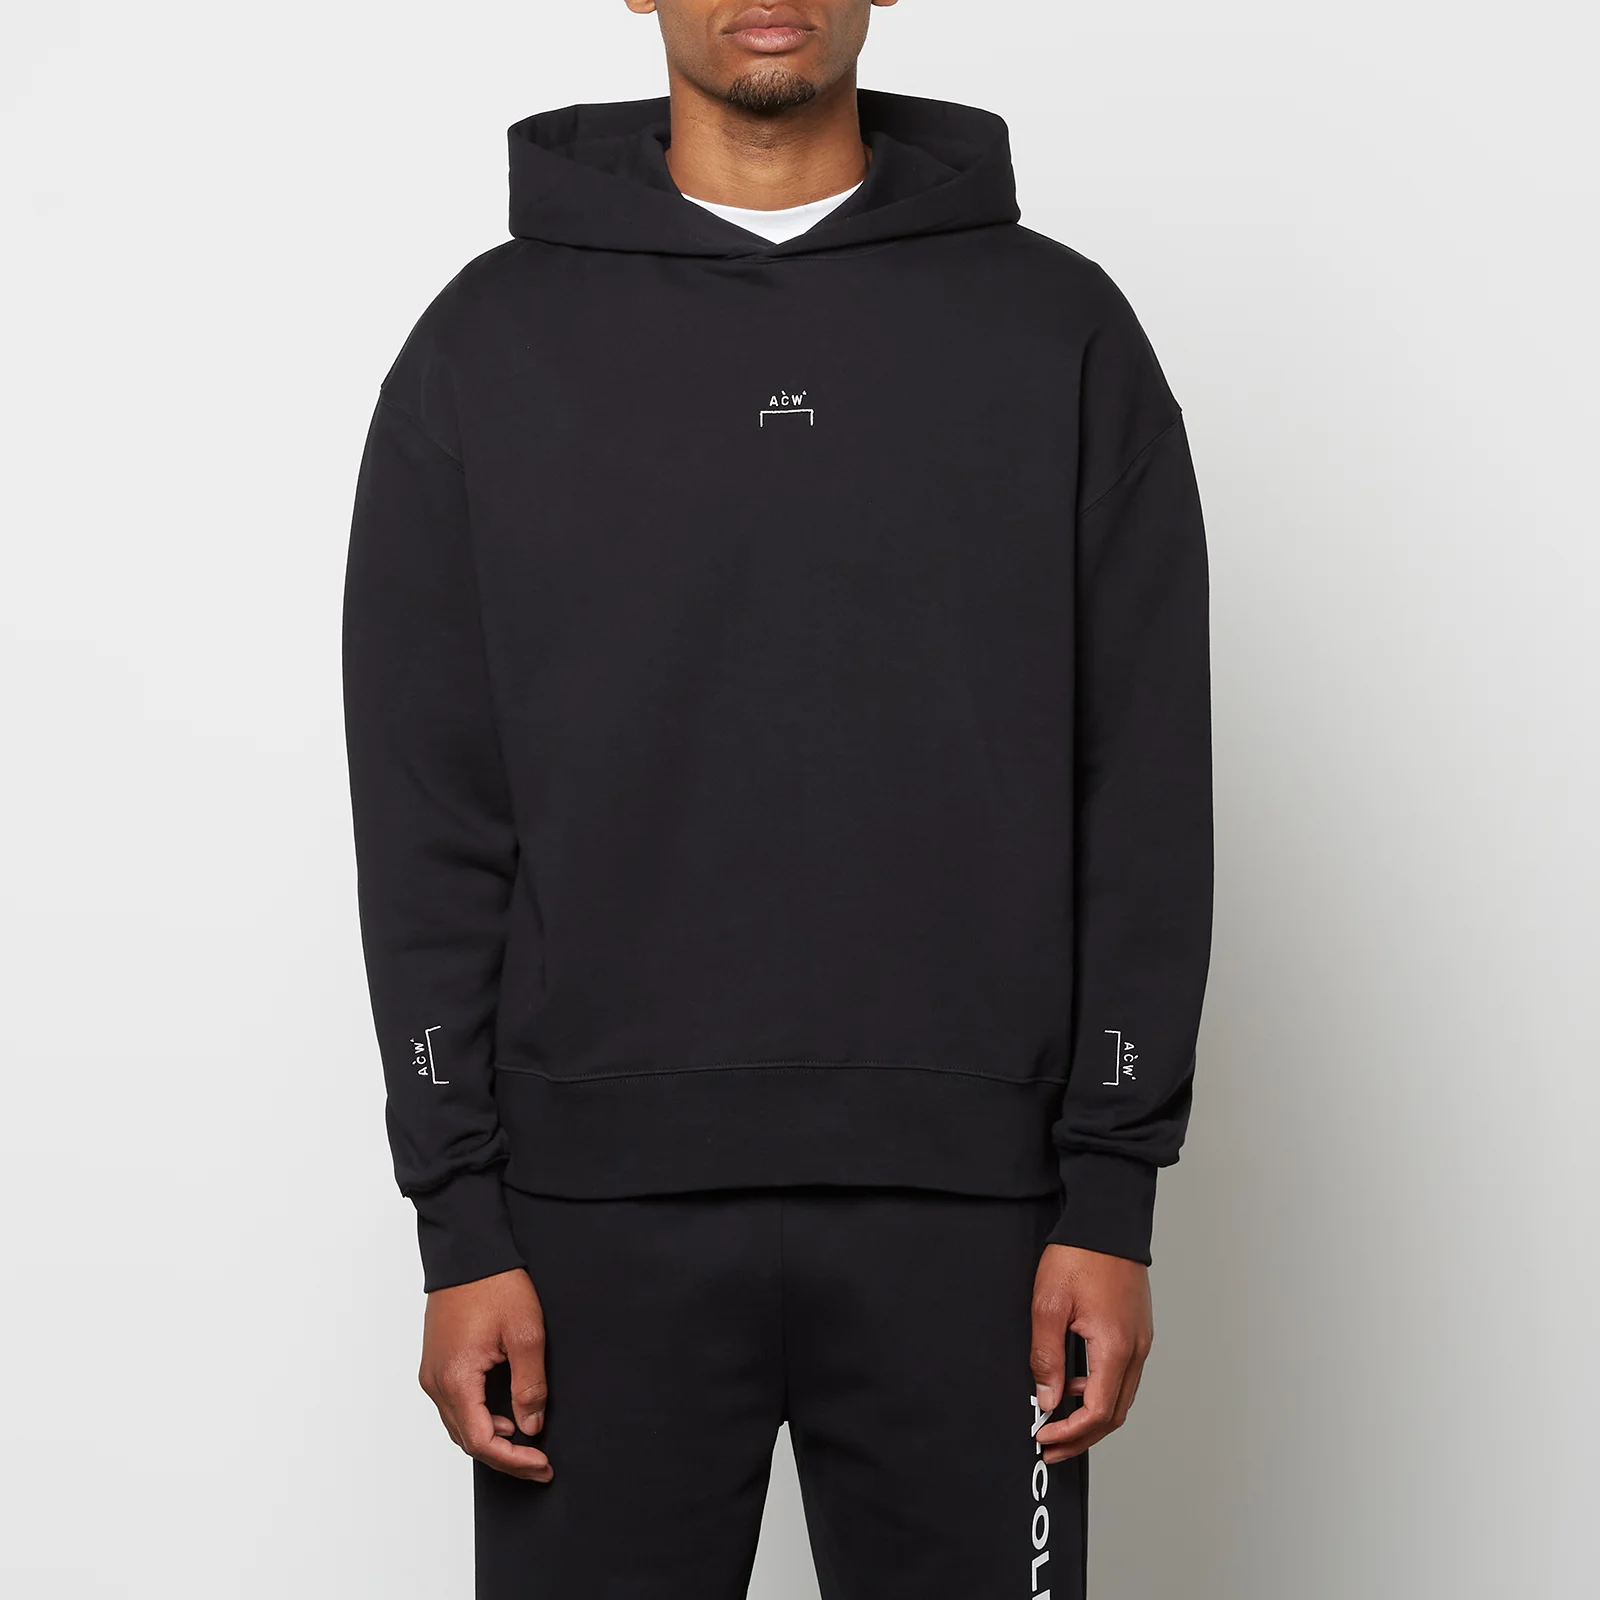 A-COLD-WALL* Men's Essential Hoodie - Black Image 1